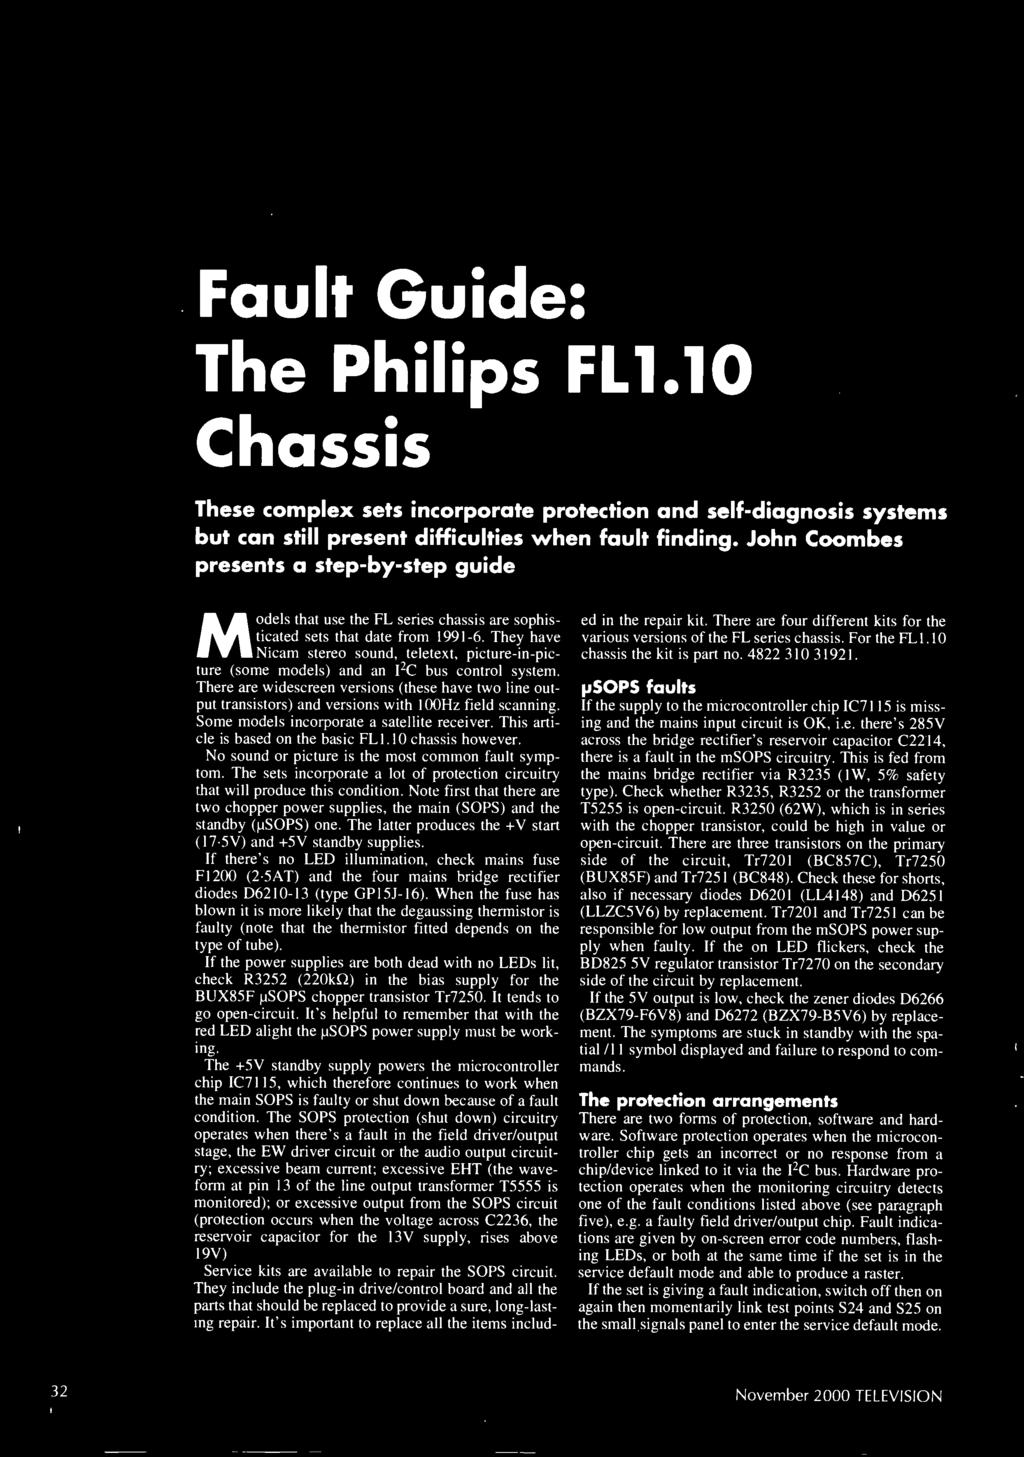 Fault Guide: The Philips FL1.10 Chassis These complex sets incorporate protection and self -diagnosis systems but can still present difficulties when fault finding.